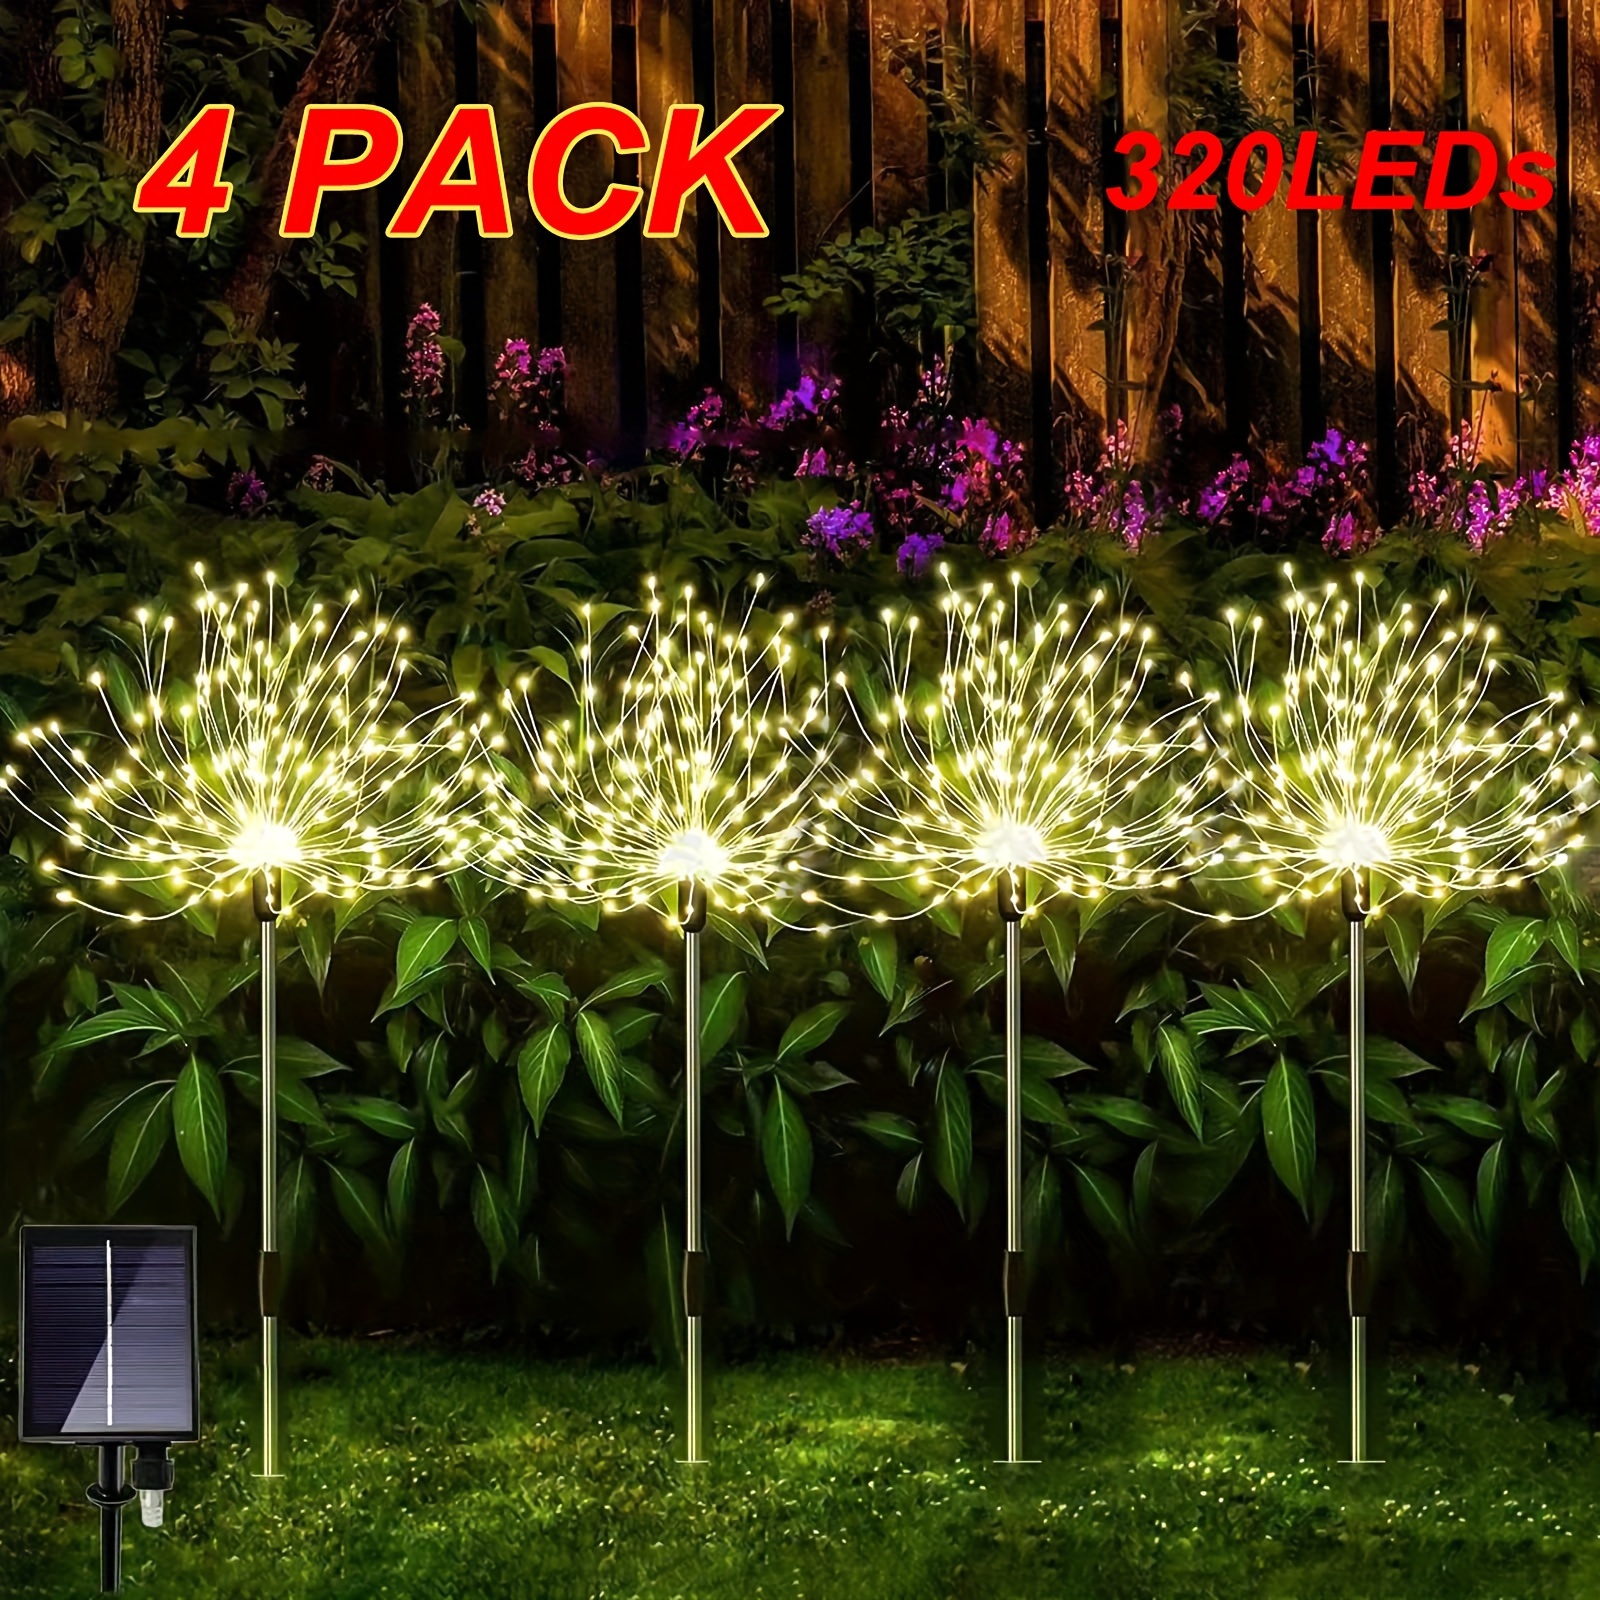 

Solar Firework Lights 4pcs 320 Led Fireworks Solar Lights Outdoor With Remote, 8 Lighting Modes For Garden Pathway Yard Decor Christmas (warm White/ Multicolored)